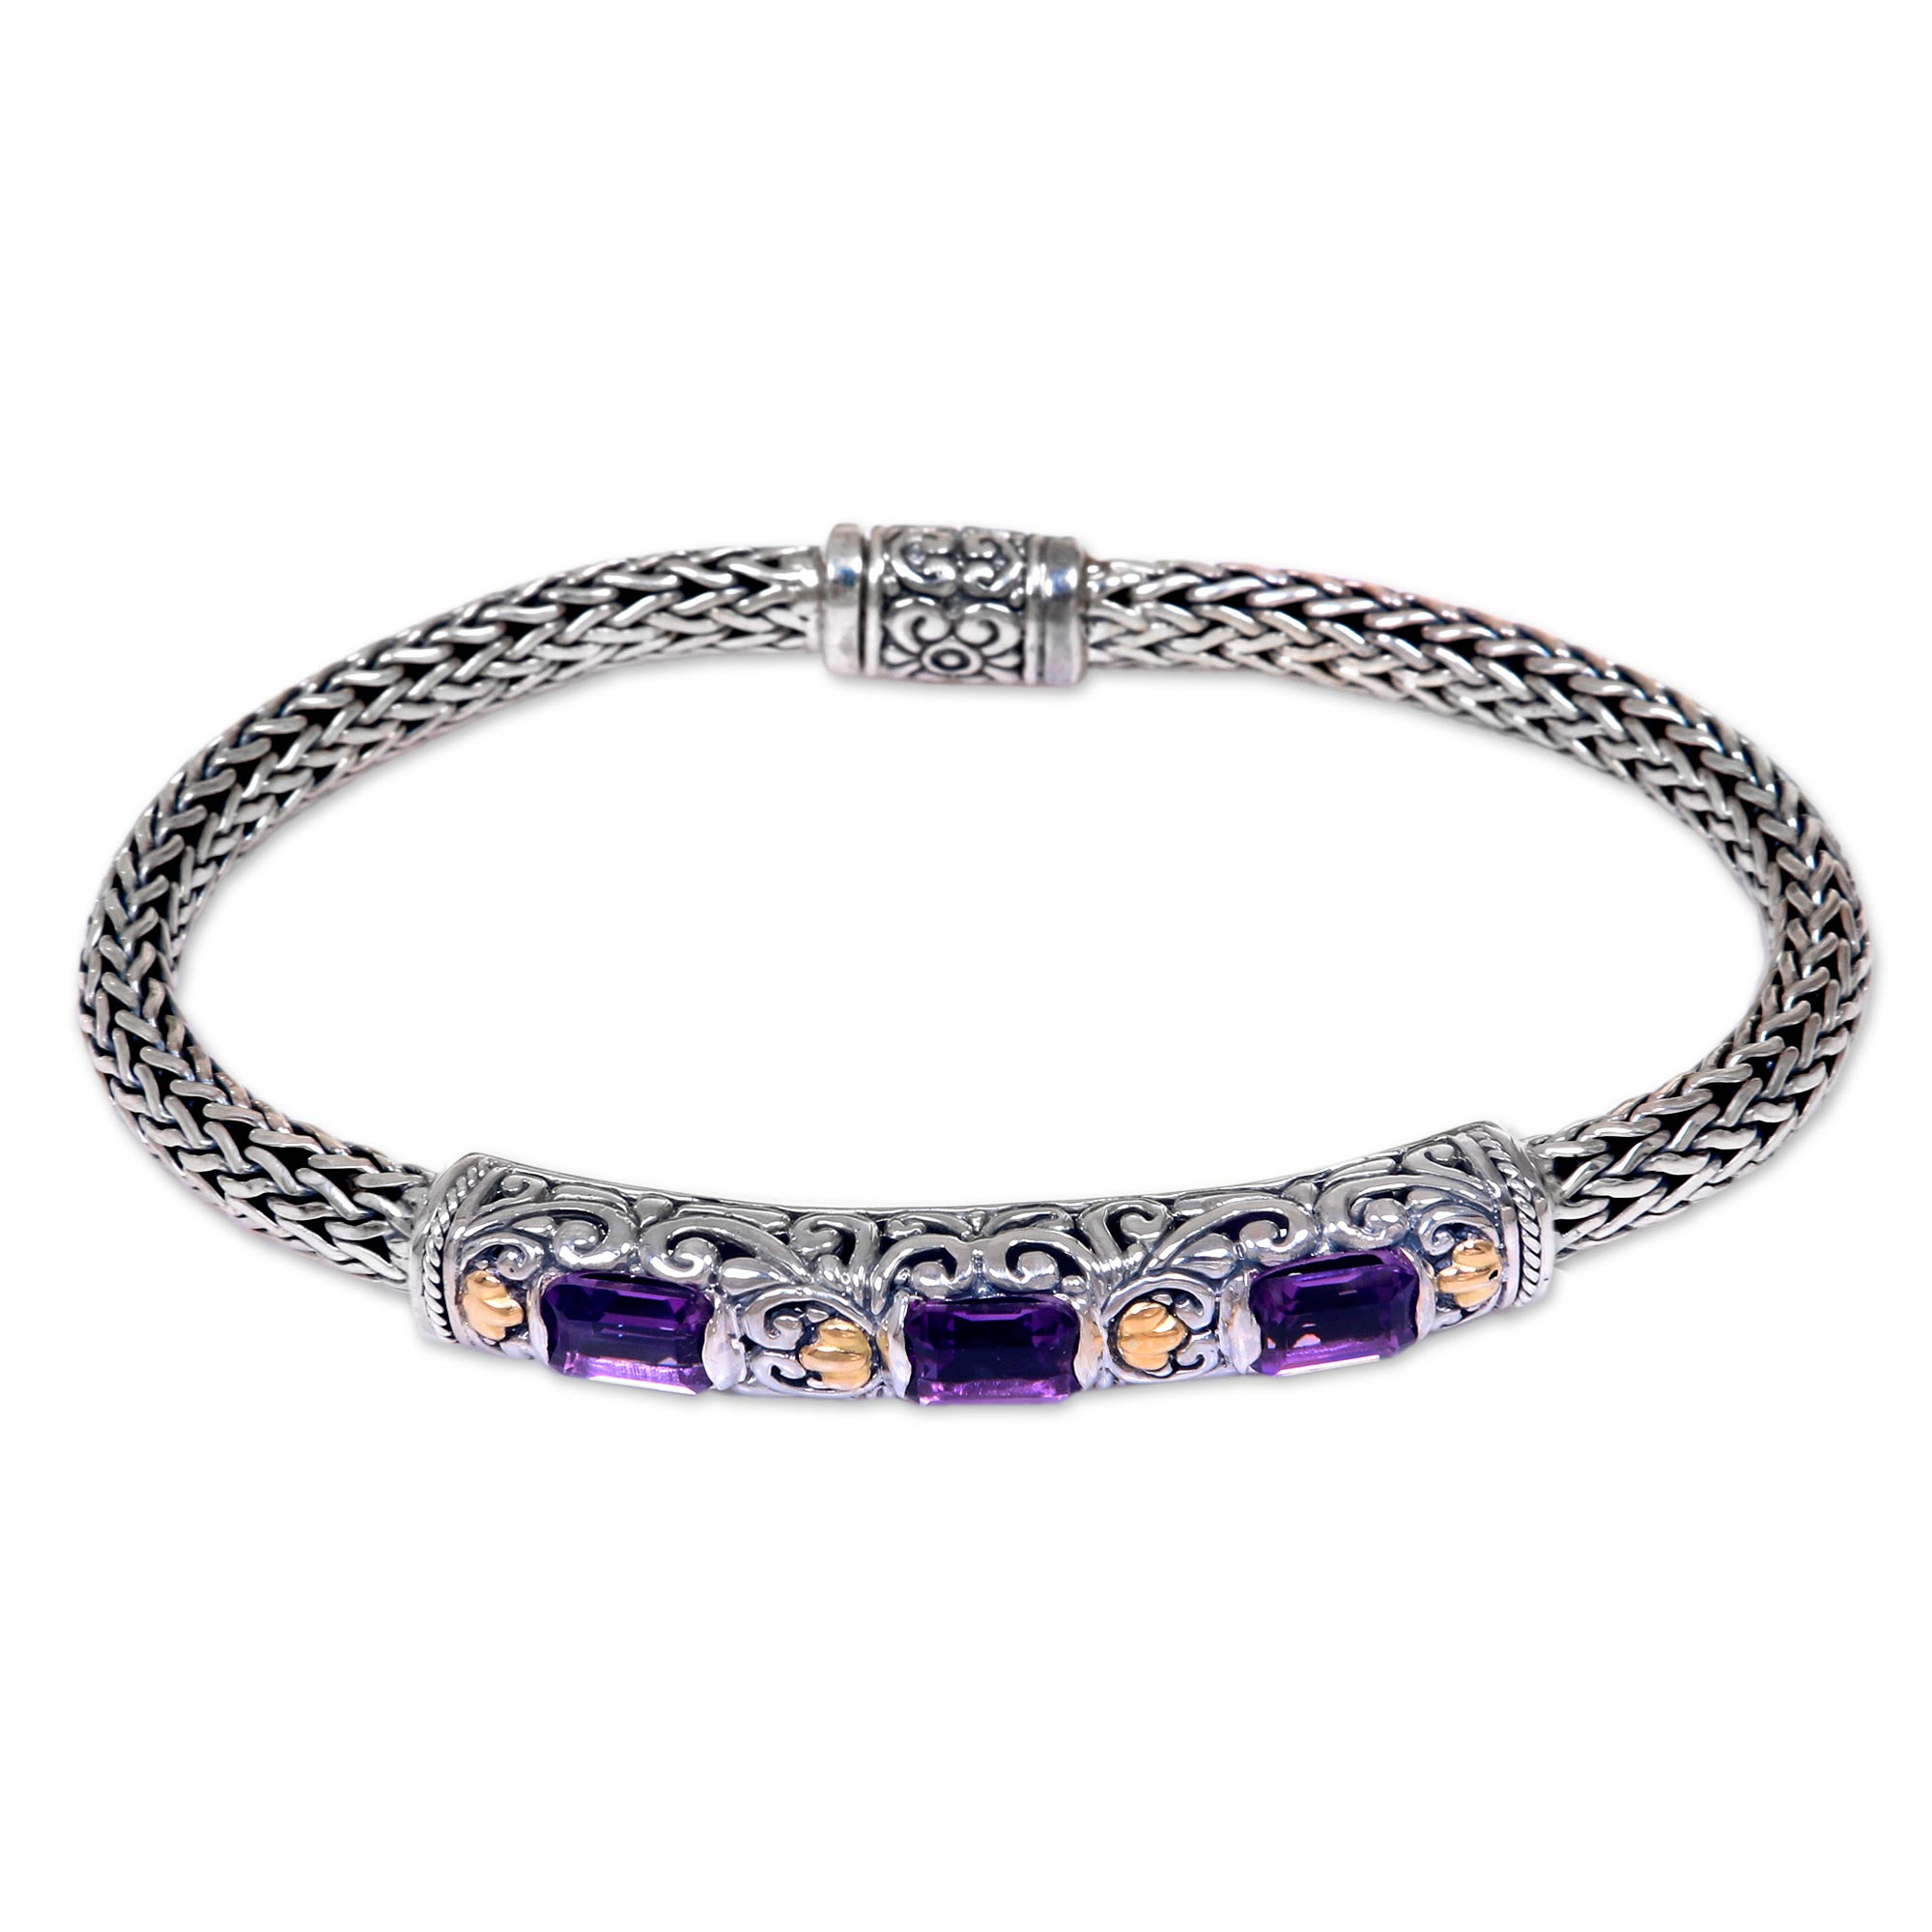 Handcrafted Bali Gold Accent Silver and Amethyst Bracelet - Bedugul ...